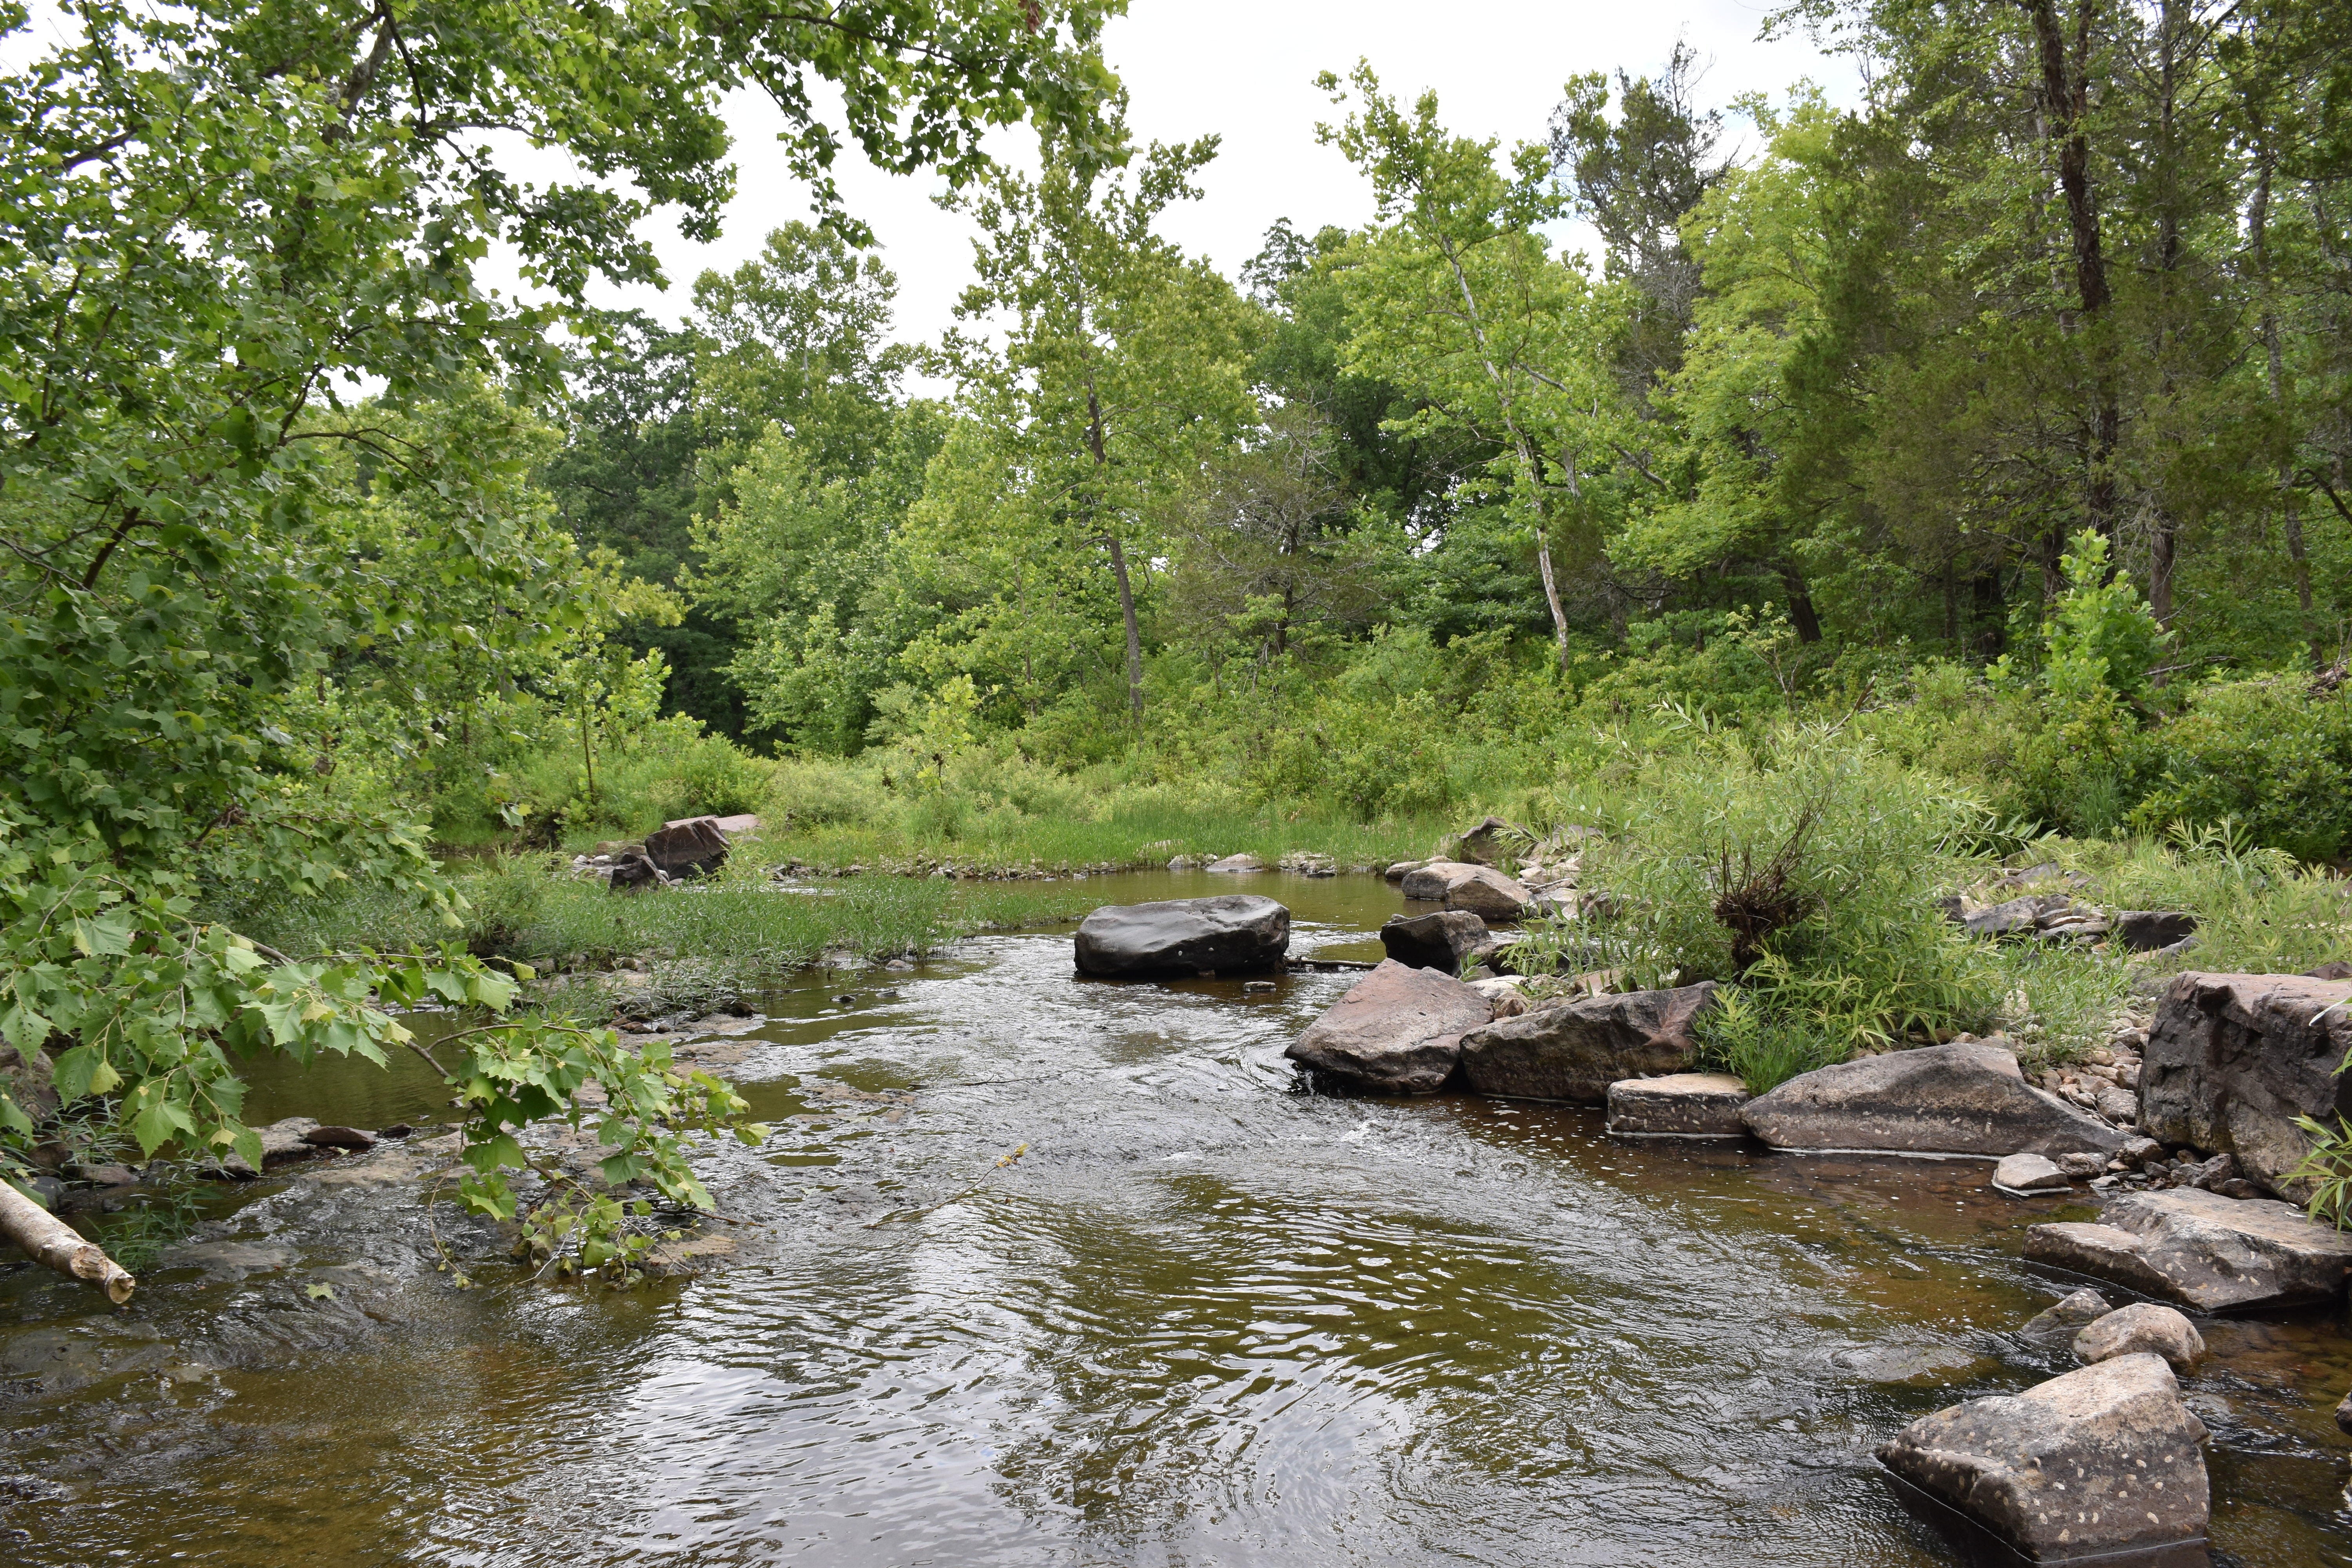 View of the creek from our site